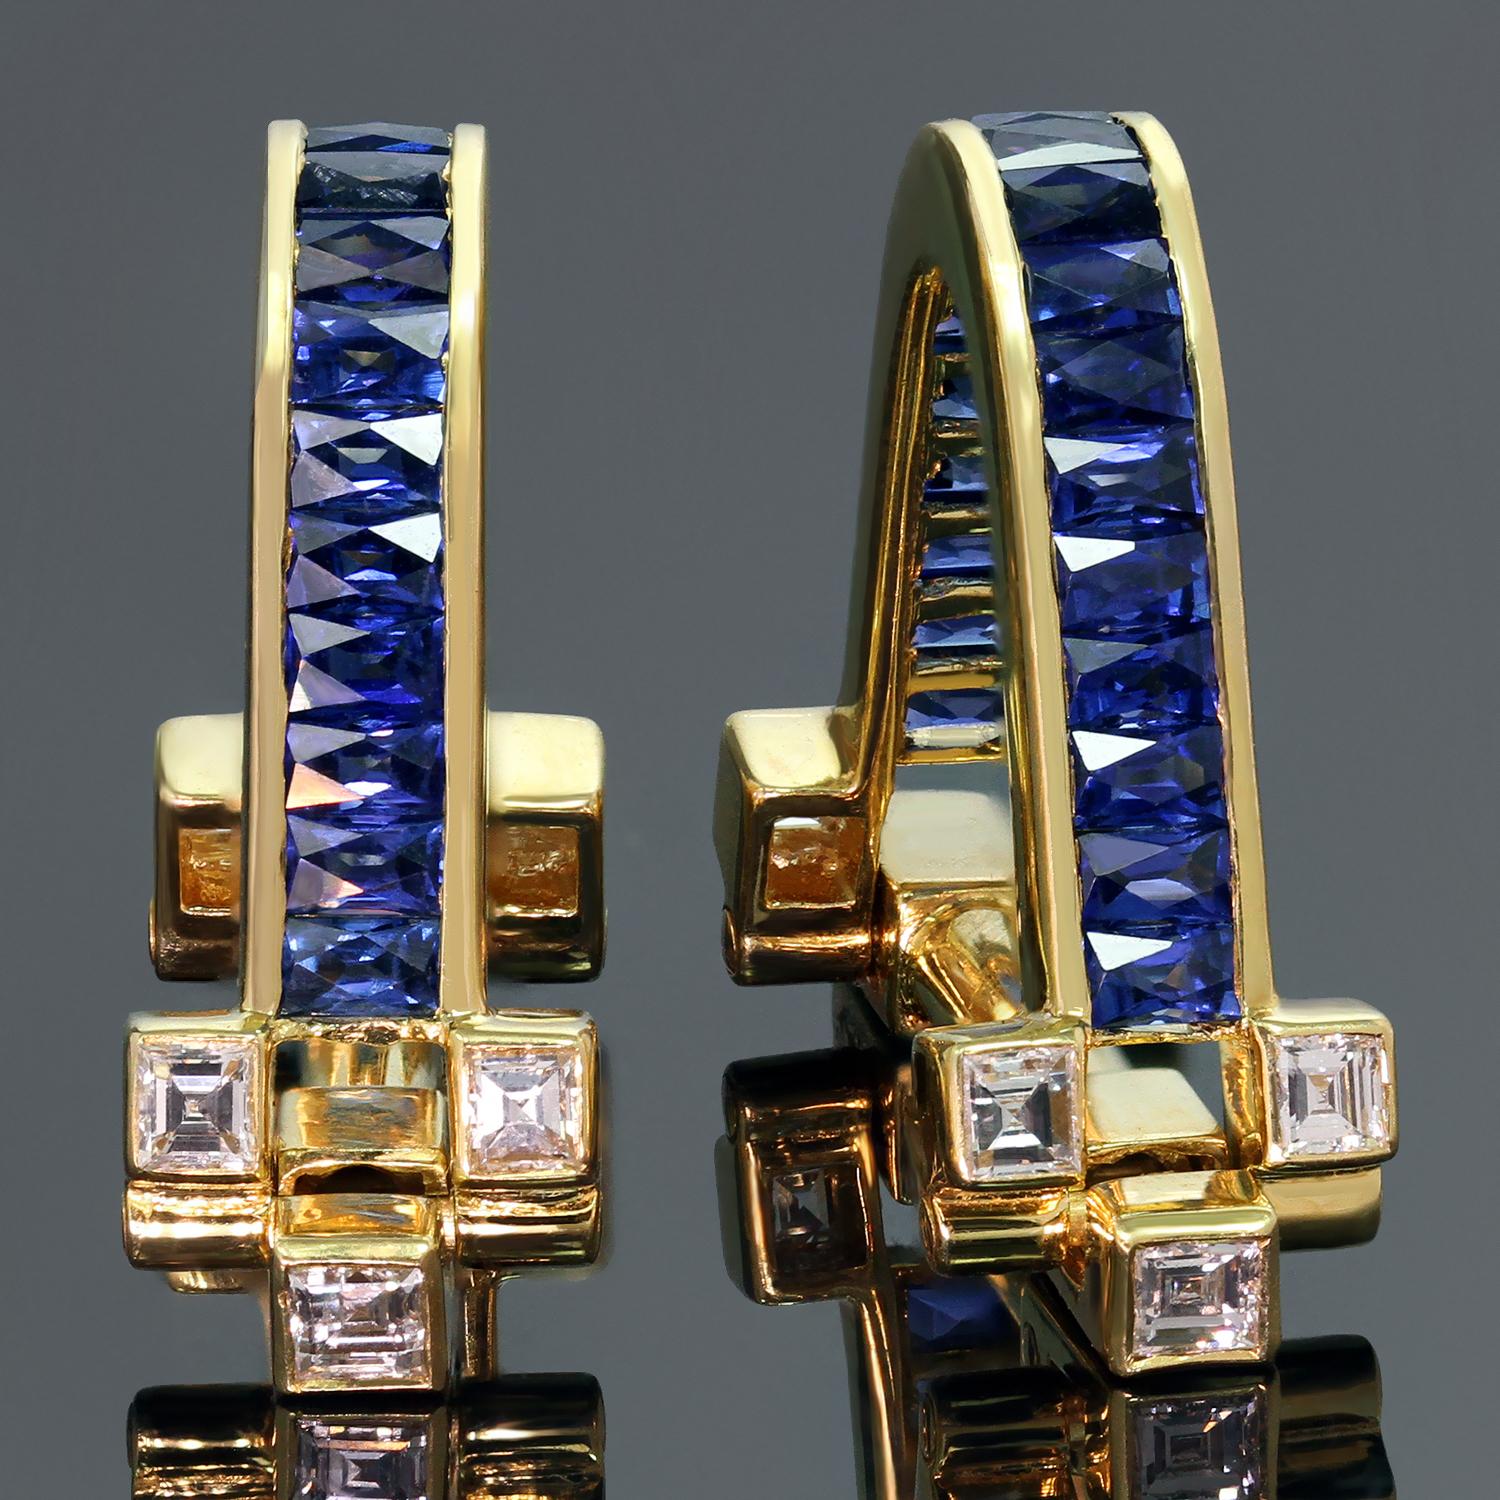 These classic Cartier cufflinks feature an arched link design crafted in 18k yellow gold and set with 38 rectangular French-cut blue sapphires, measuring approximately 2.0mm x 3.0mm and weighing an estimated 4.00 carats, and 12 square-step cut F